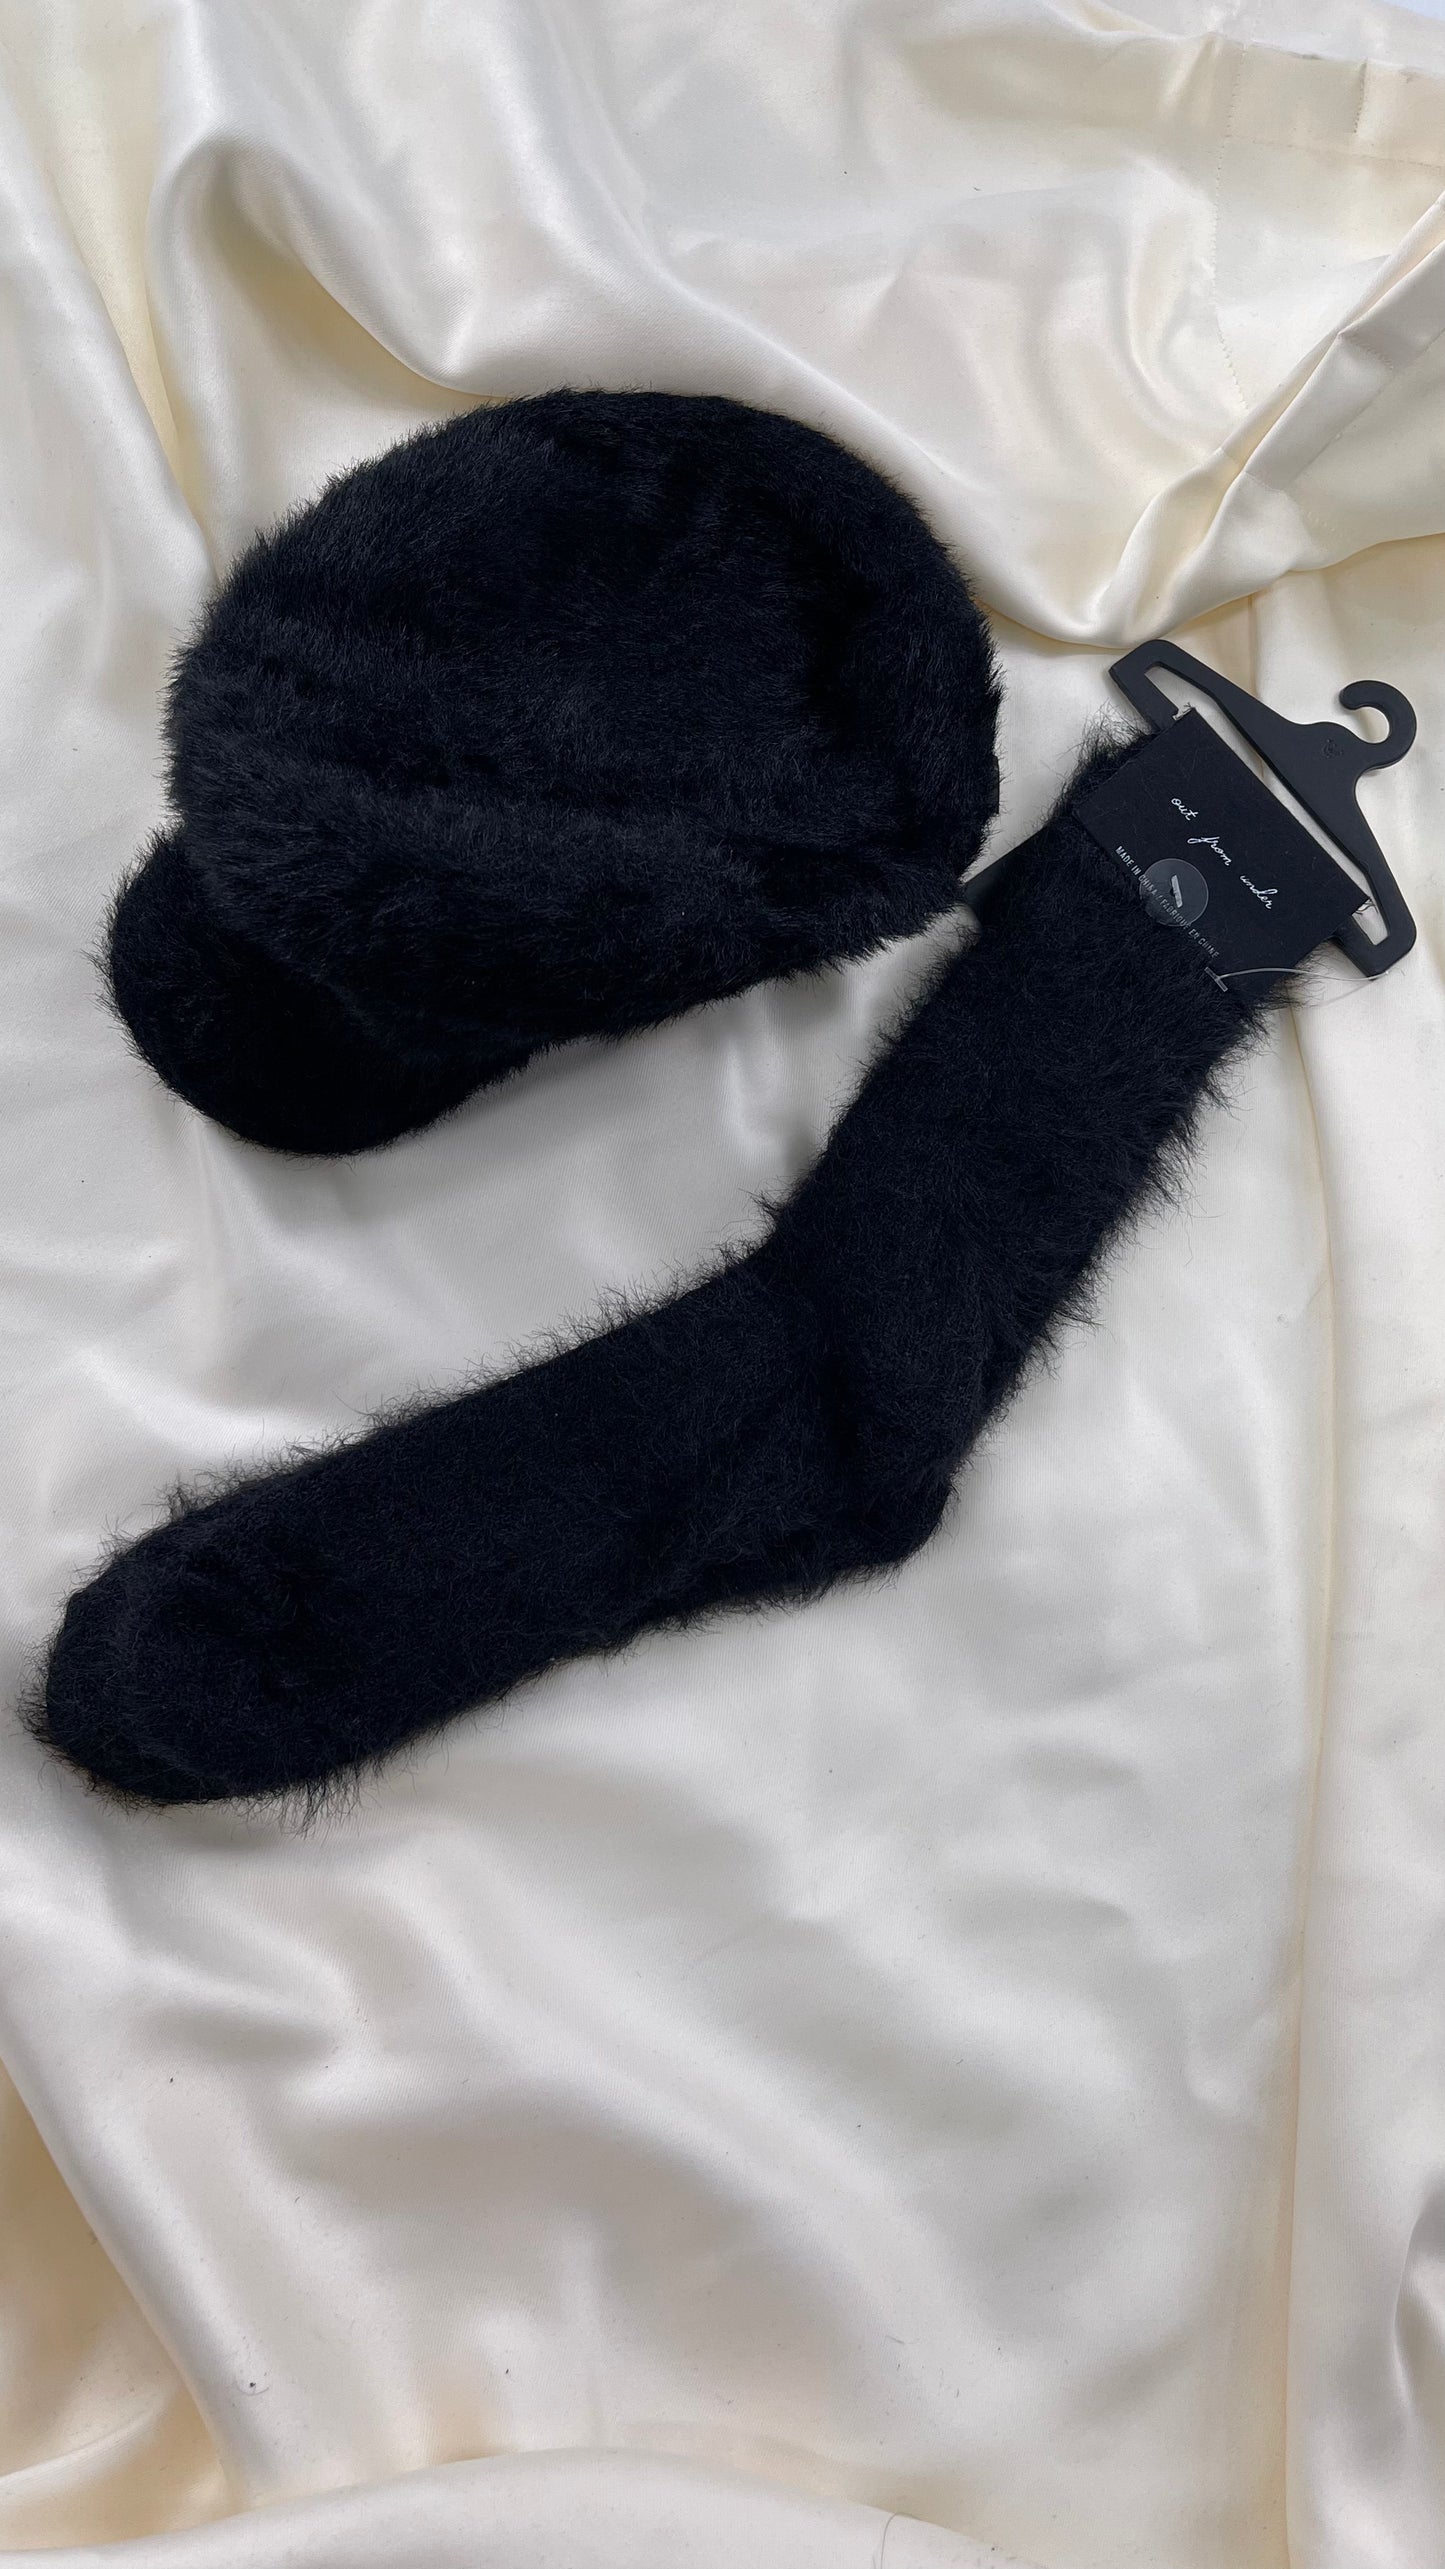 Urban Outfitters Black Fuzzy Newsboy Cap and Knee High Sock Set